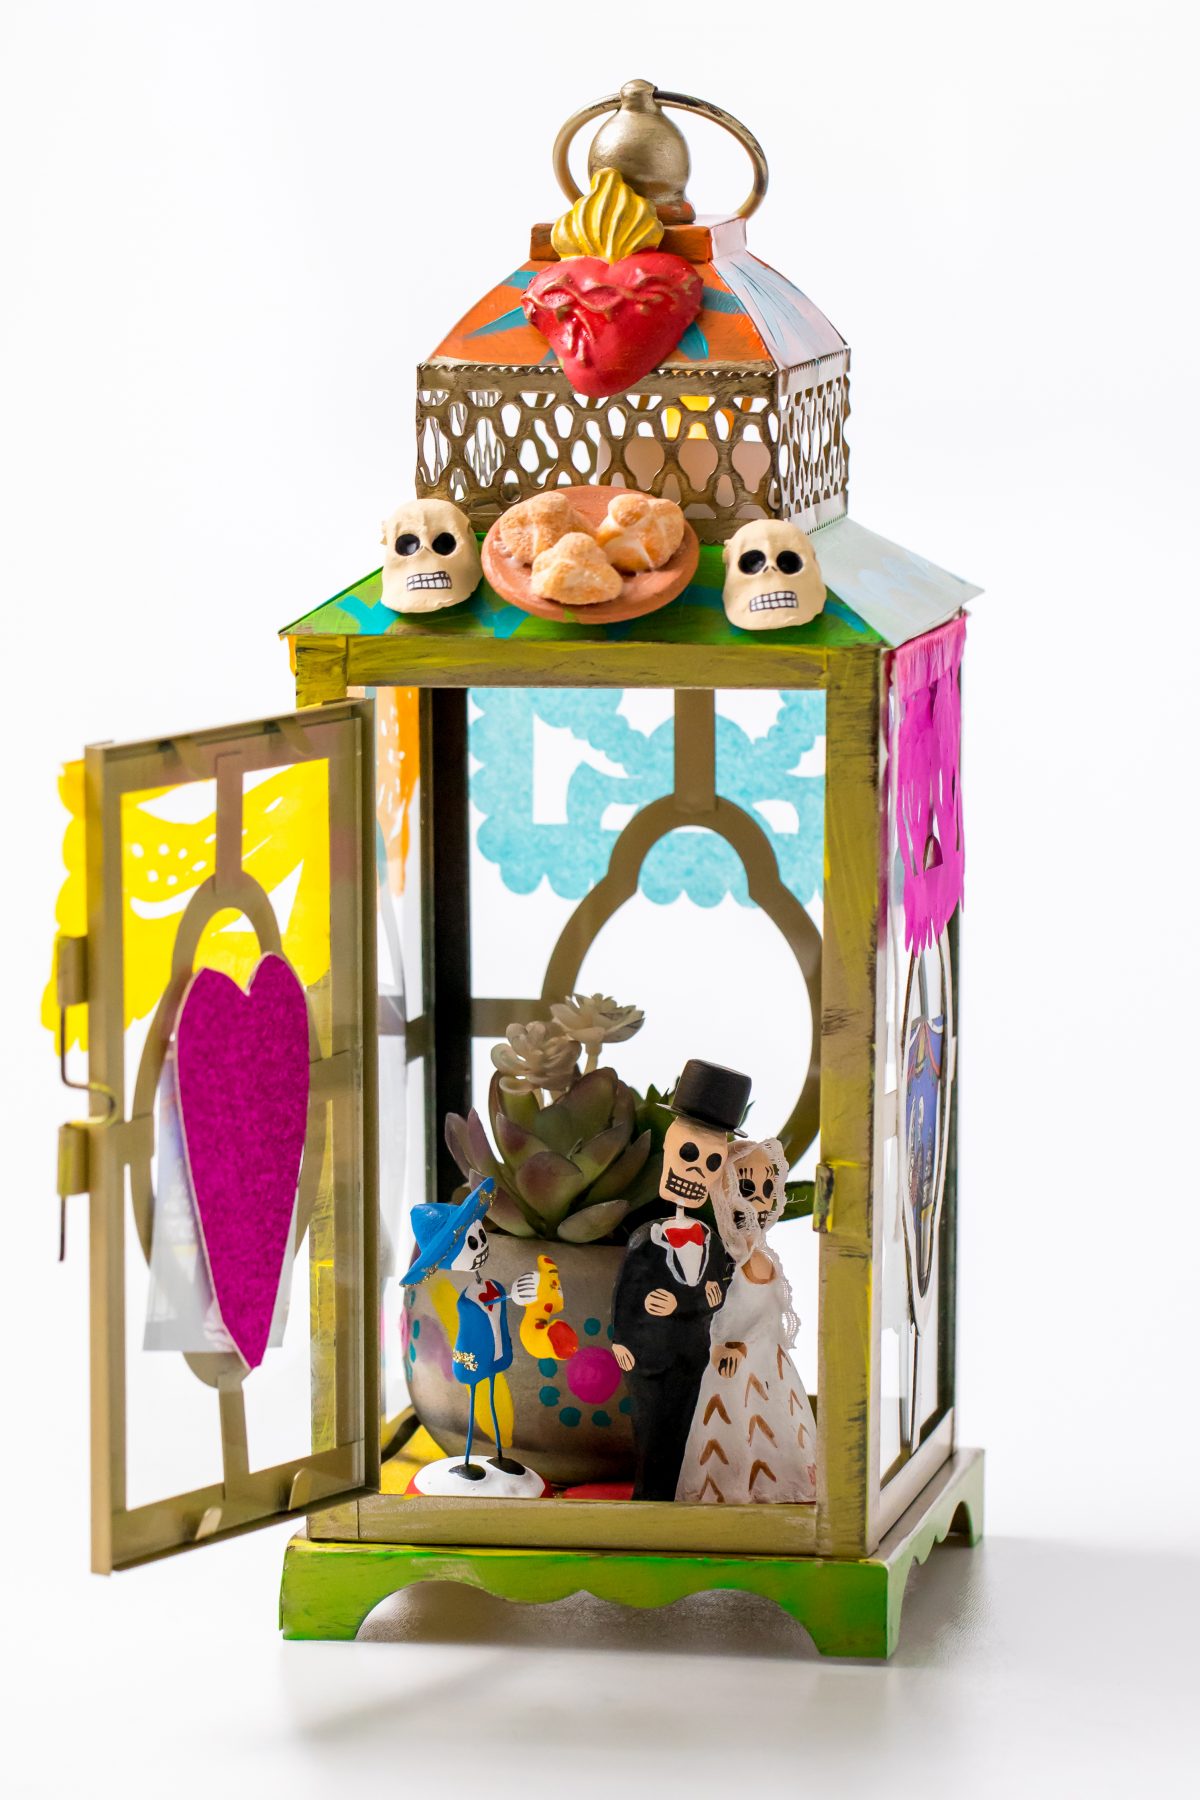 5D4B6374 - Crafty Chica - Day of the dead Shrine